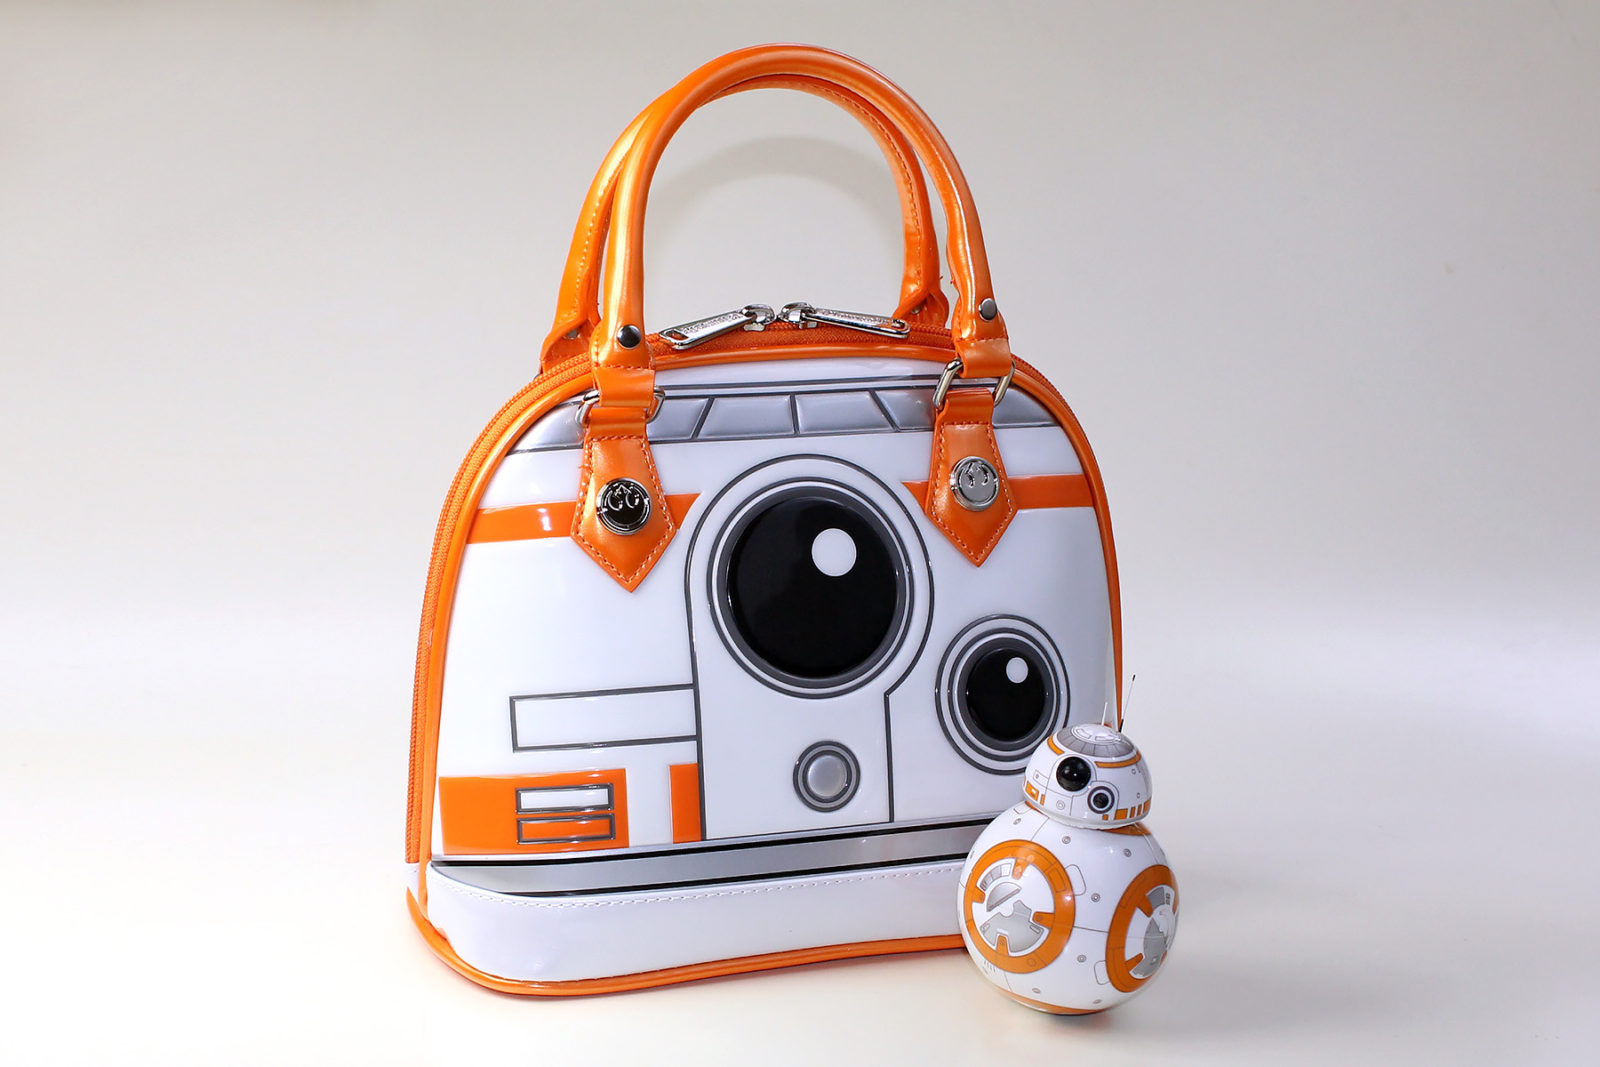 Loungefly - BB-8 dome handbag (with Sphero BB-8, not included)